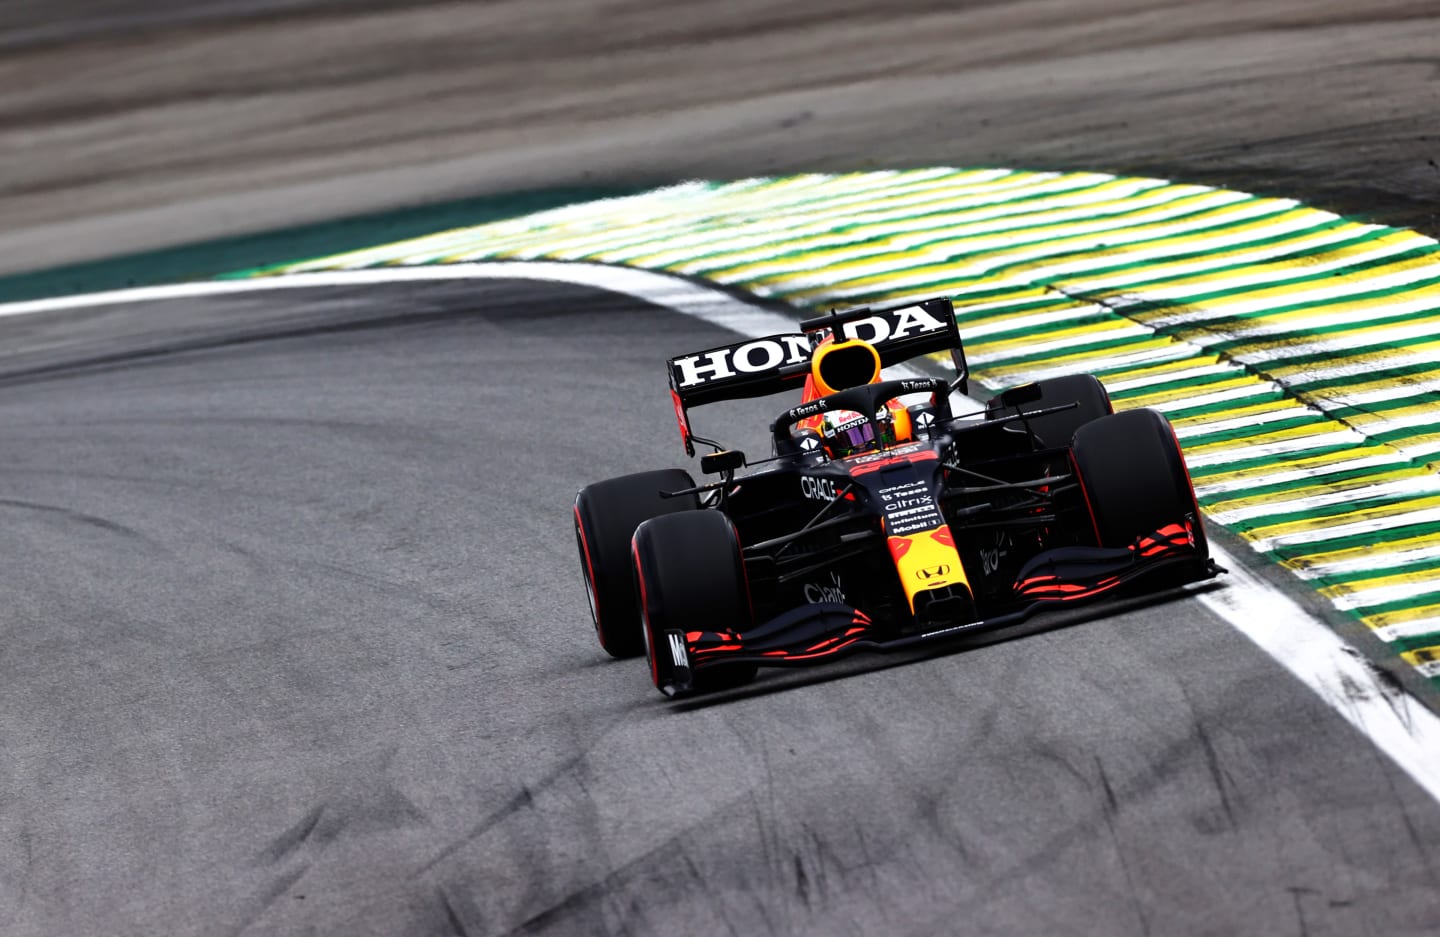 SAO PAULO, BRAZIL - NOVEMBER 12: Max Verstappen of the Netherlands driving the (33) Red Bull Racing RB16B Honda during qualifying ahead of the F1 Grand Prix of Brazil at Autodromo Jose Carlos Pace on November 12, 2021 in Sao Paulo, Brazil. (Photo by Mark Thompson/Getty Images)